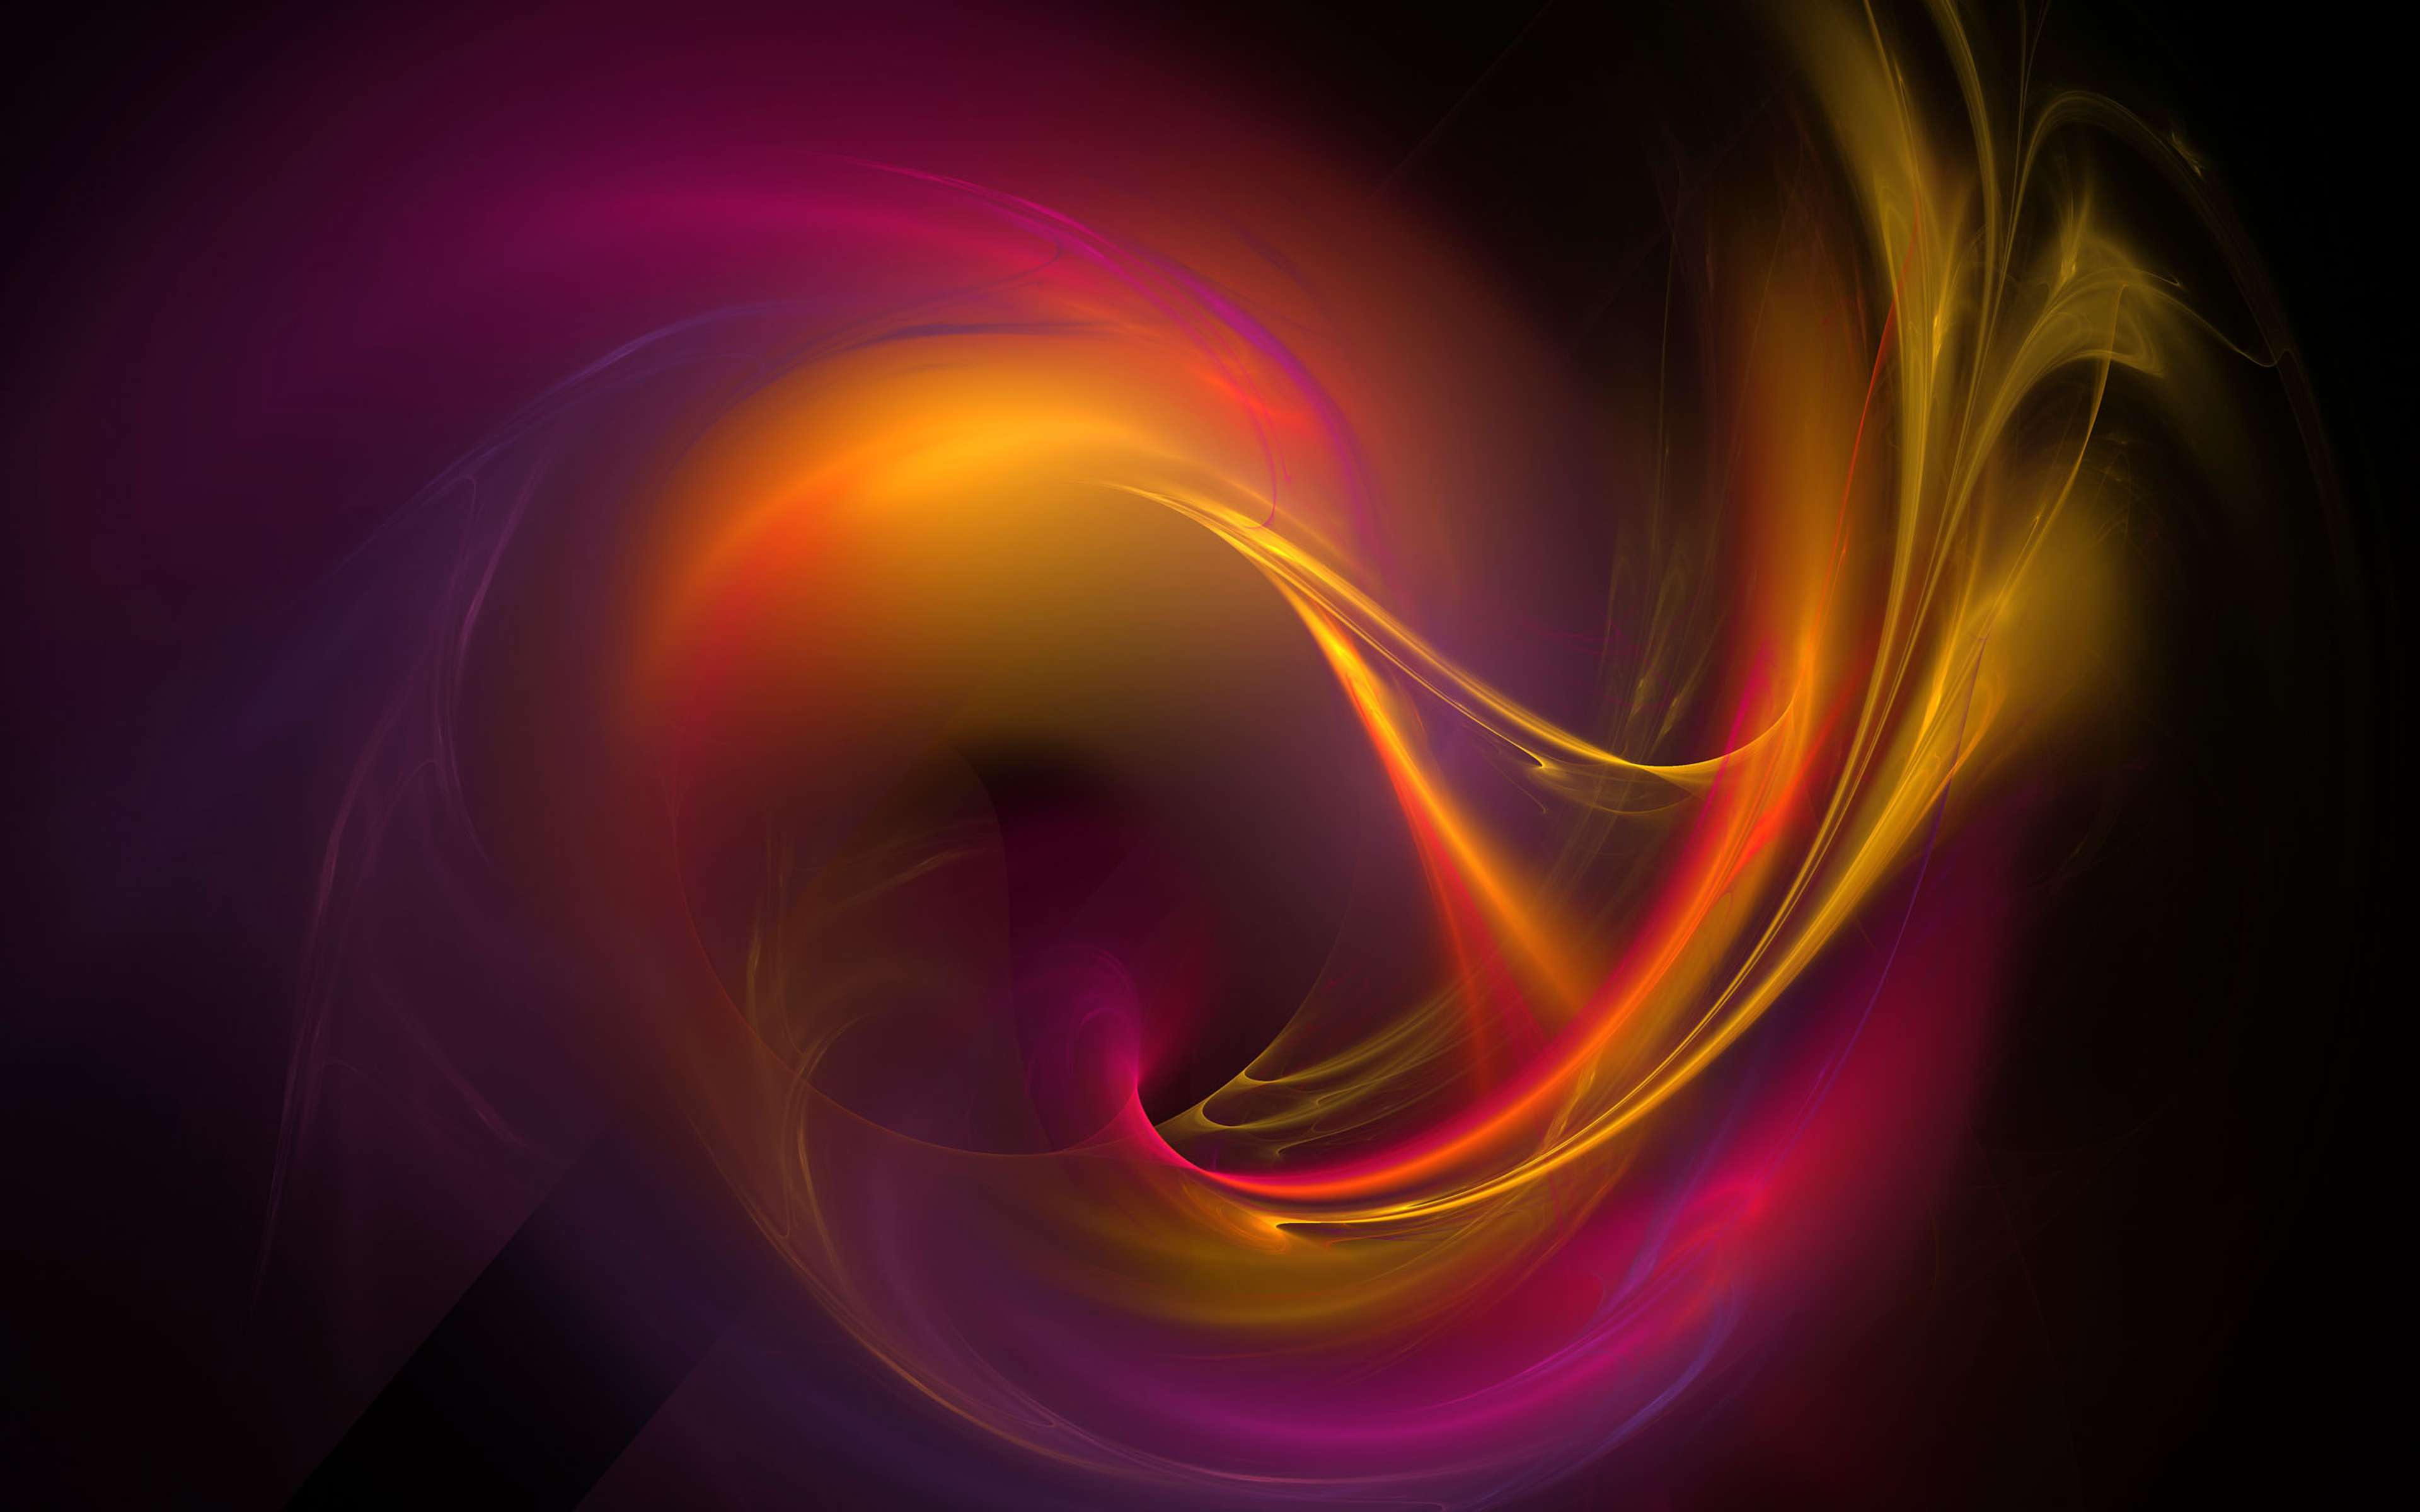 An abstract image of swirling blurred orange, purple and pink light over a black background.